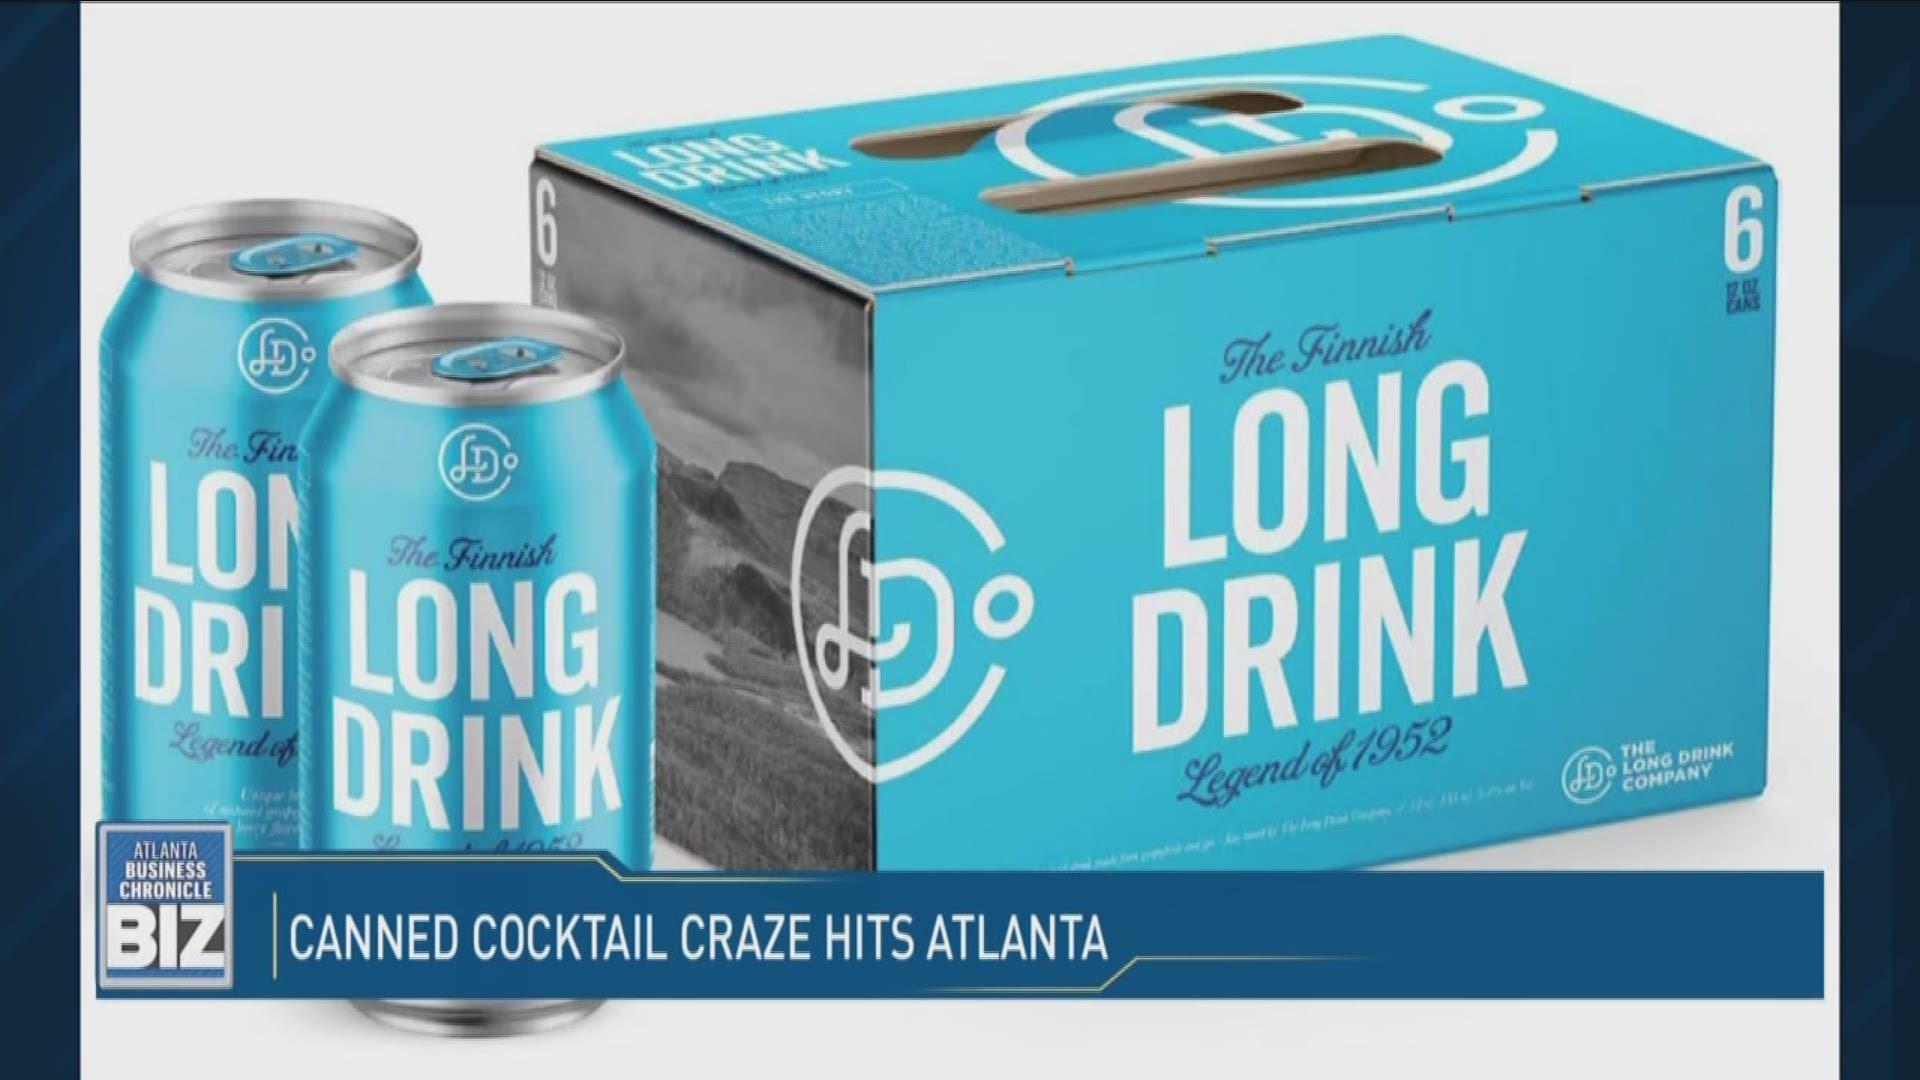 The Finnish Long Drink, a canned cocktail that's a gin and grapefruit combo, is performing well in in its new Atlanta market!